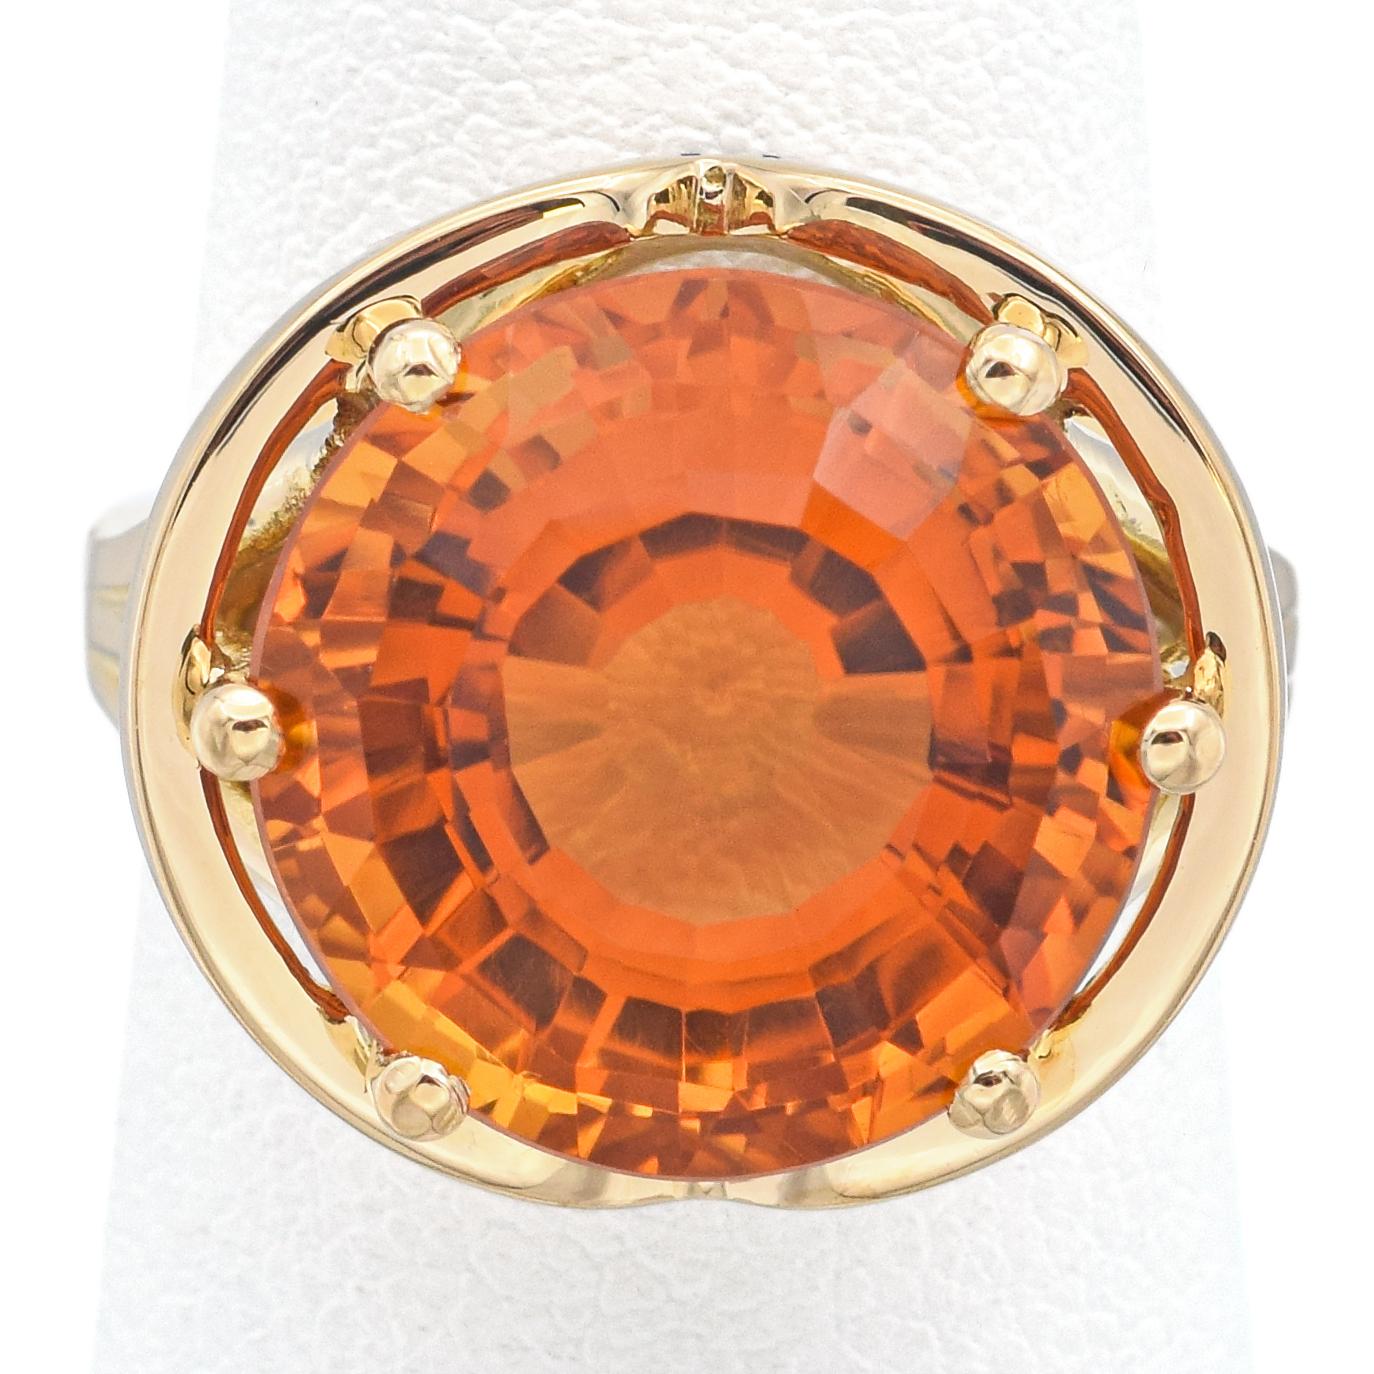 Round Cut Vintage Carl Bucherer 8.17 Ct Citrine Yellow Gold Ring Size 5.5 with Box